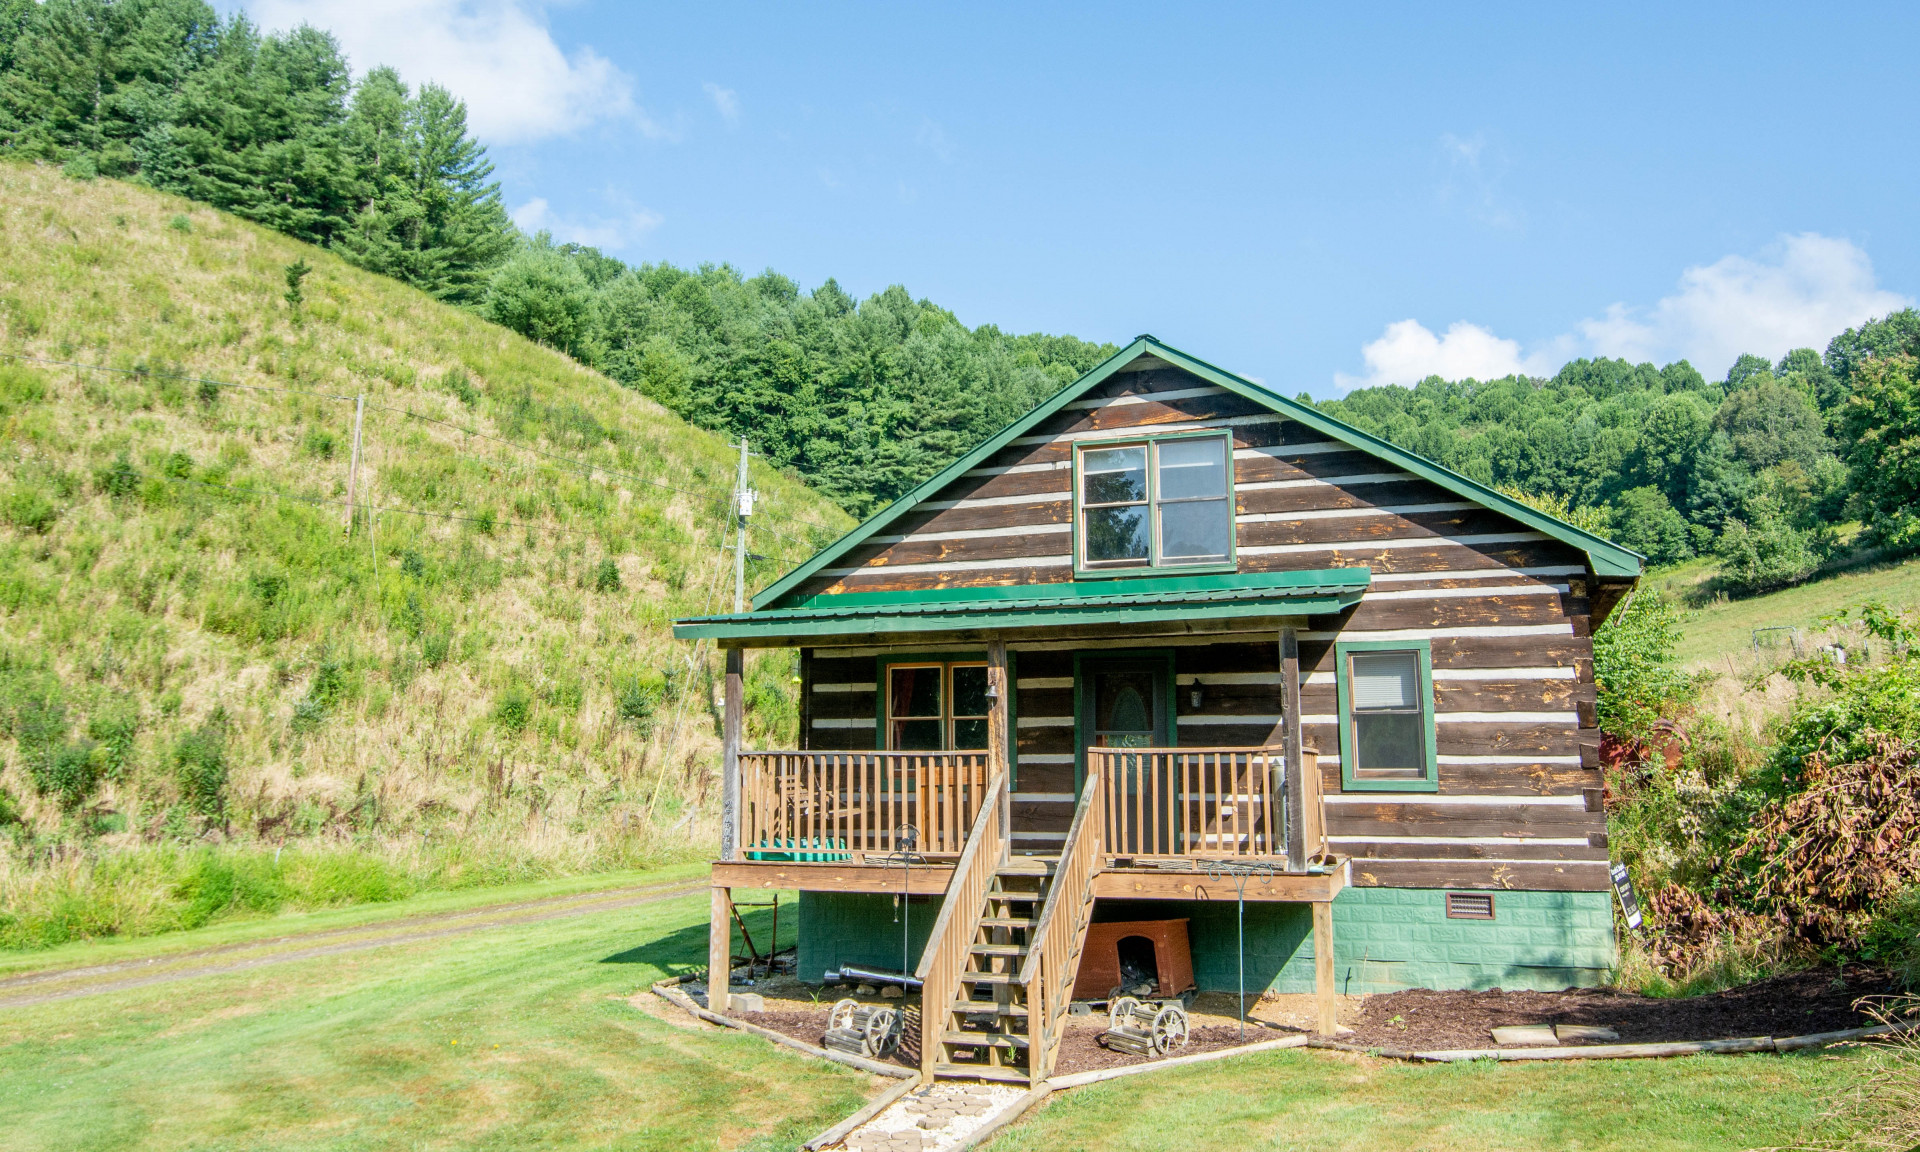 Located in the Lansing area of Ashe County, this sweet 3-bedroom, 1-bath log cabin offers an affordable option for your High Country mountain retreat.